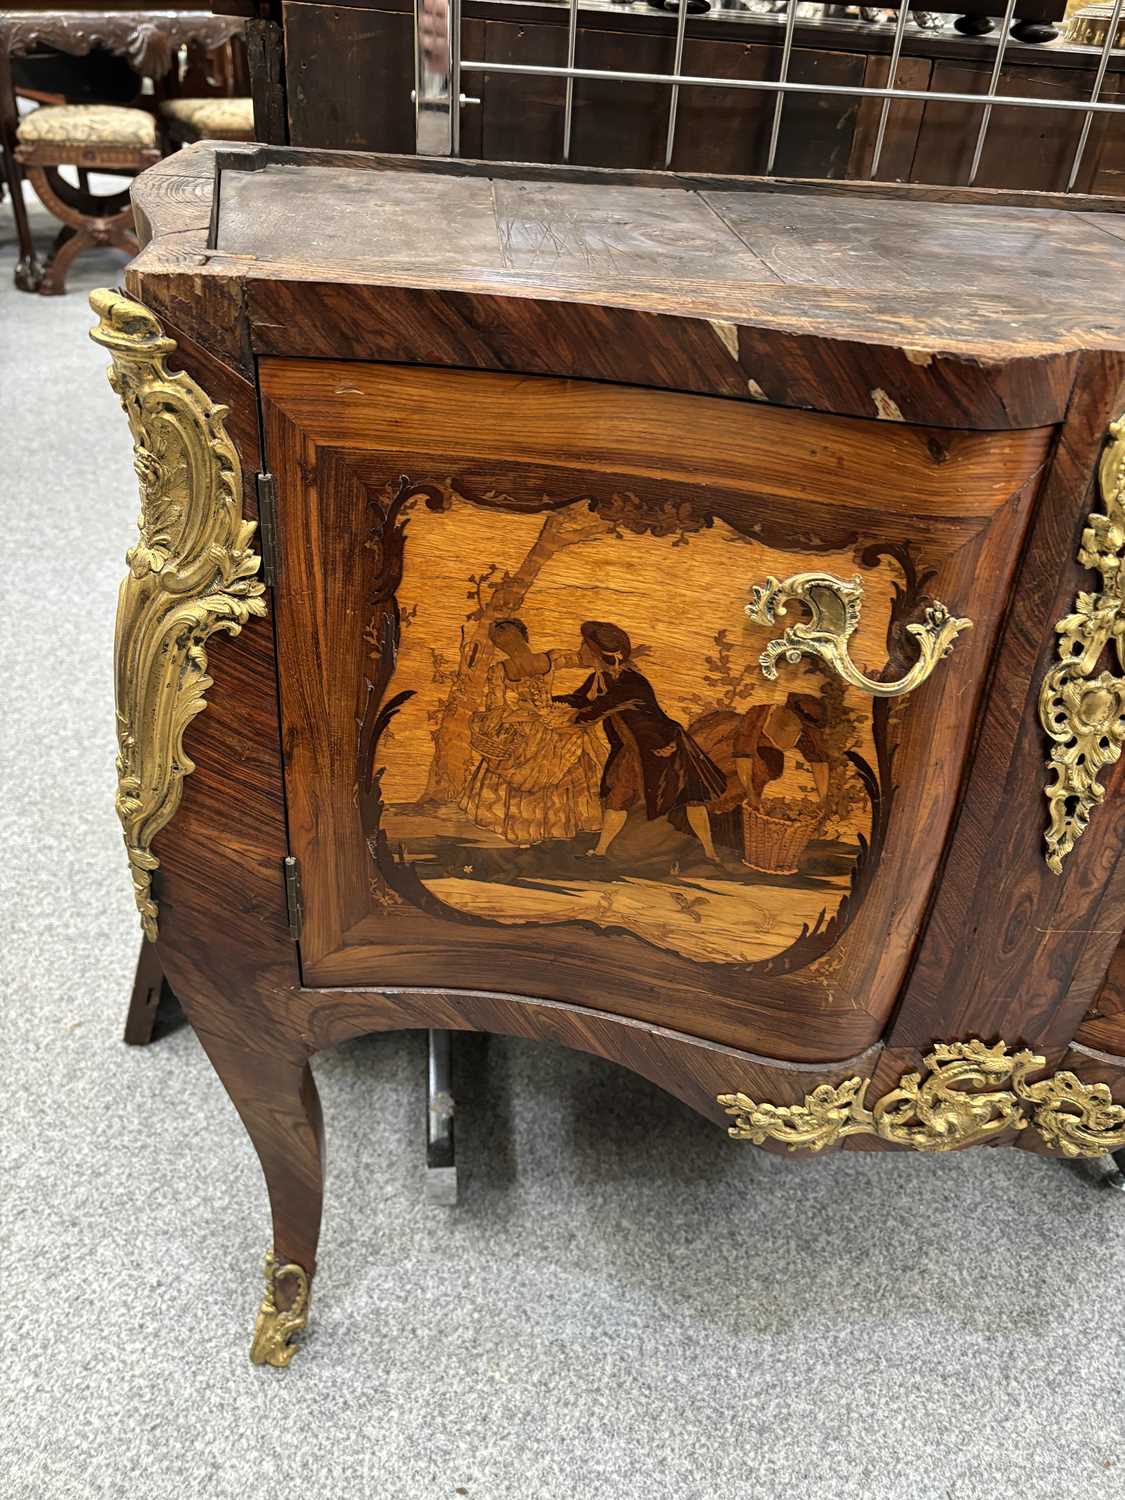 A SMALL 19TH CENTURY FRENCH INLAID KINGWOOD MARBLE-TOPPED COMMODE, STAMPED L. DROMARD, PARIS - Image 7 of 15